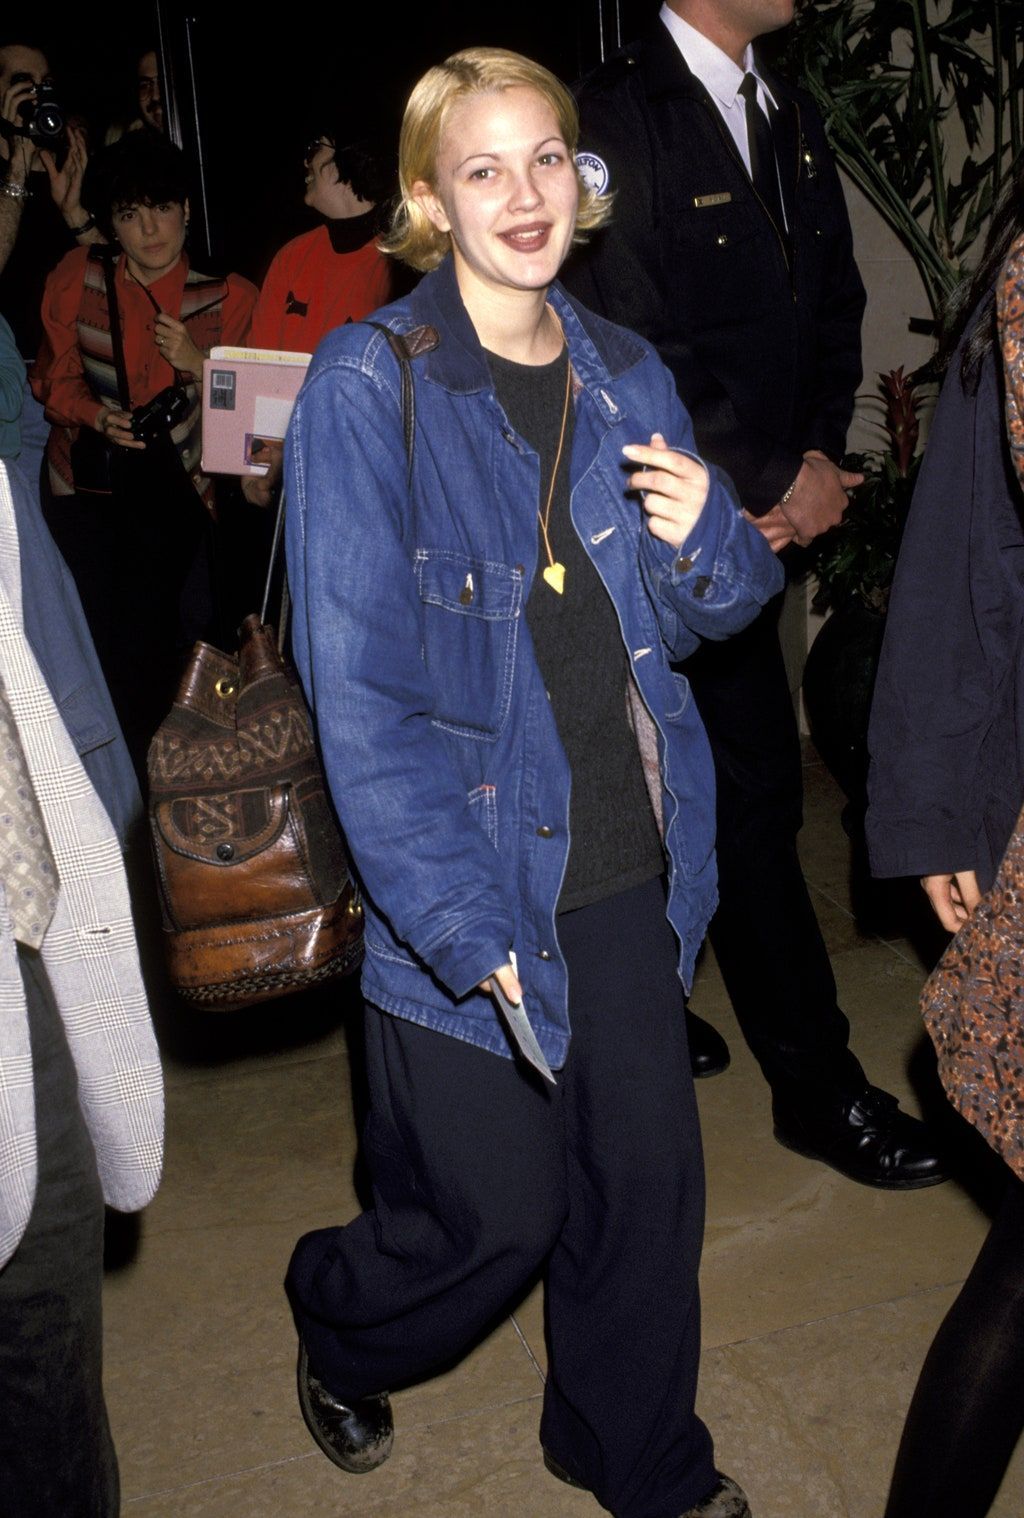 25 Times Drew Barrymore Was A '90s Dream Girl On The Red Carpet - 25 Times Drew Barrymore Was A '90s Dream Girl On The Red Carpet -   21 drew barrymore style 90s ideas